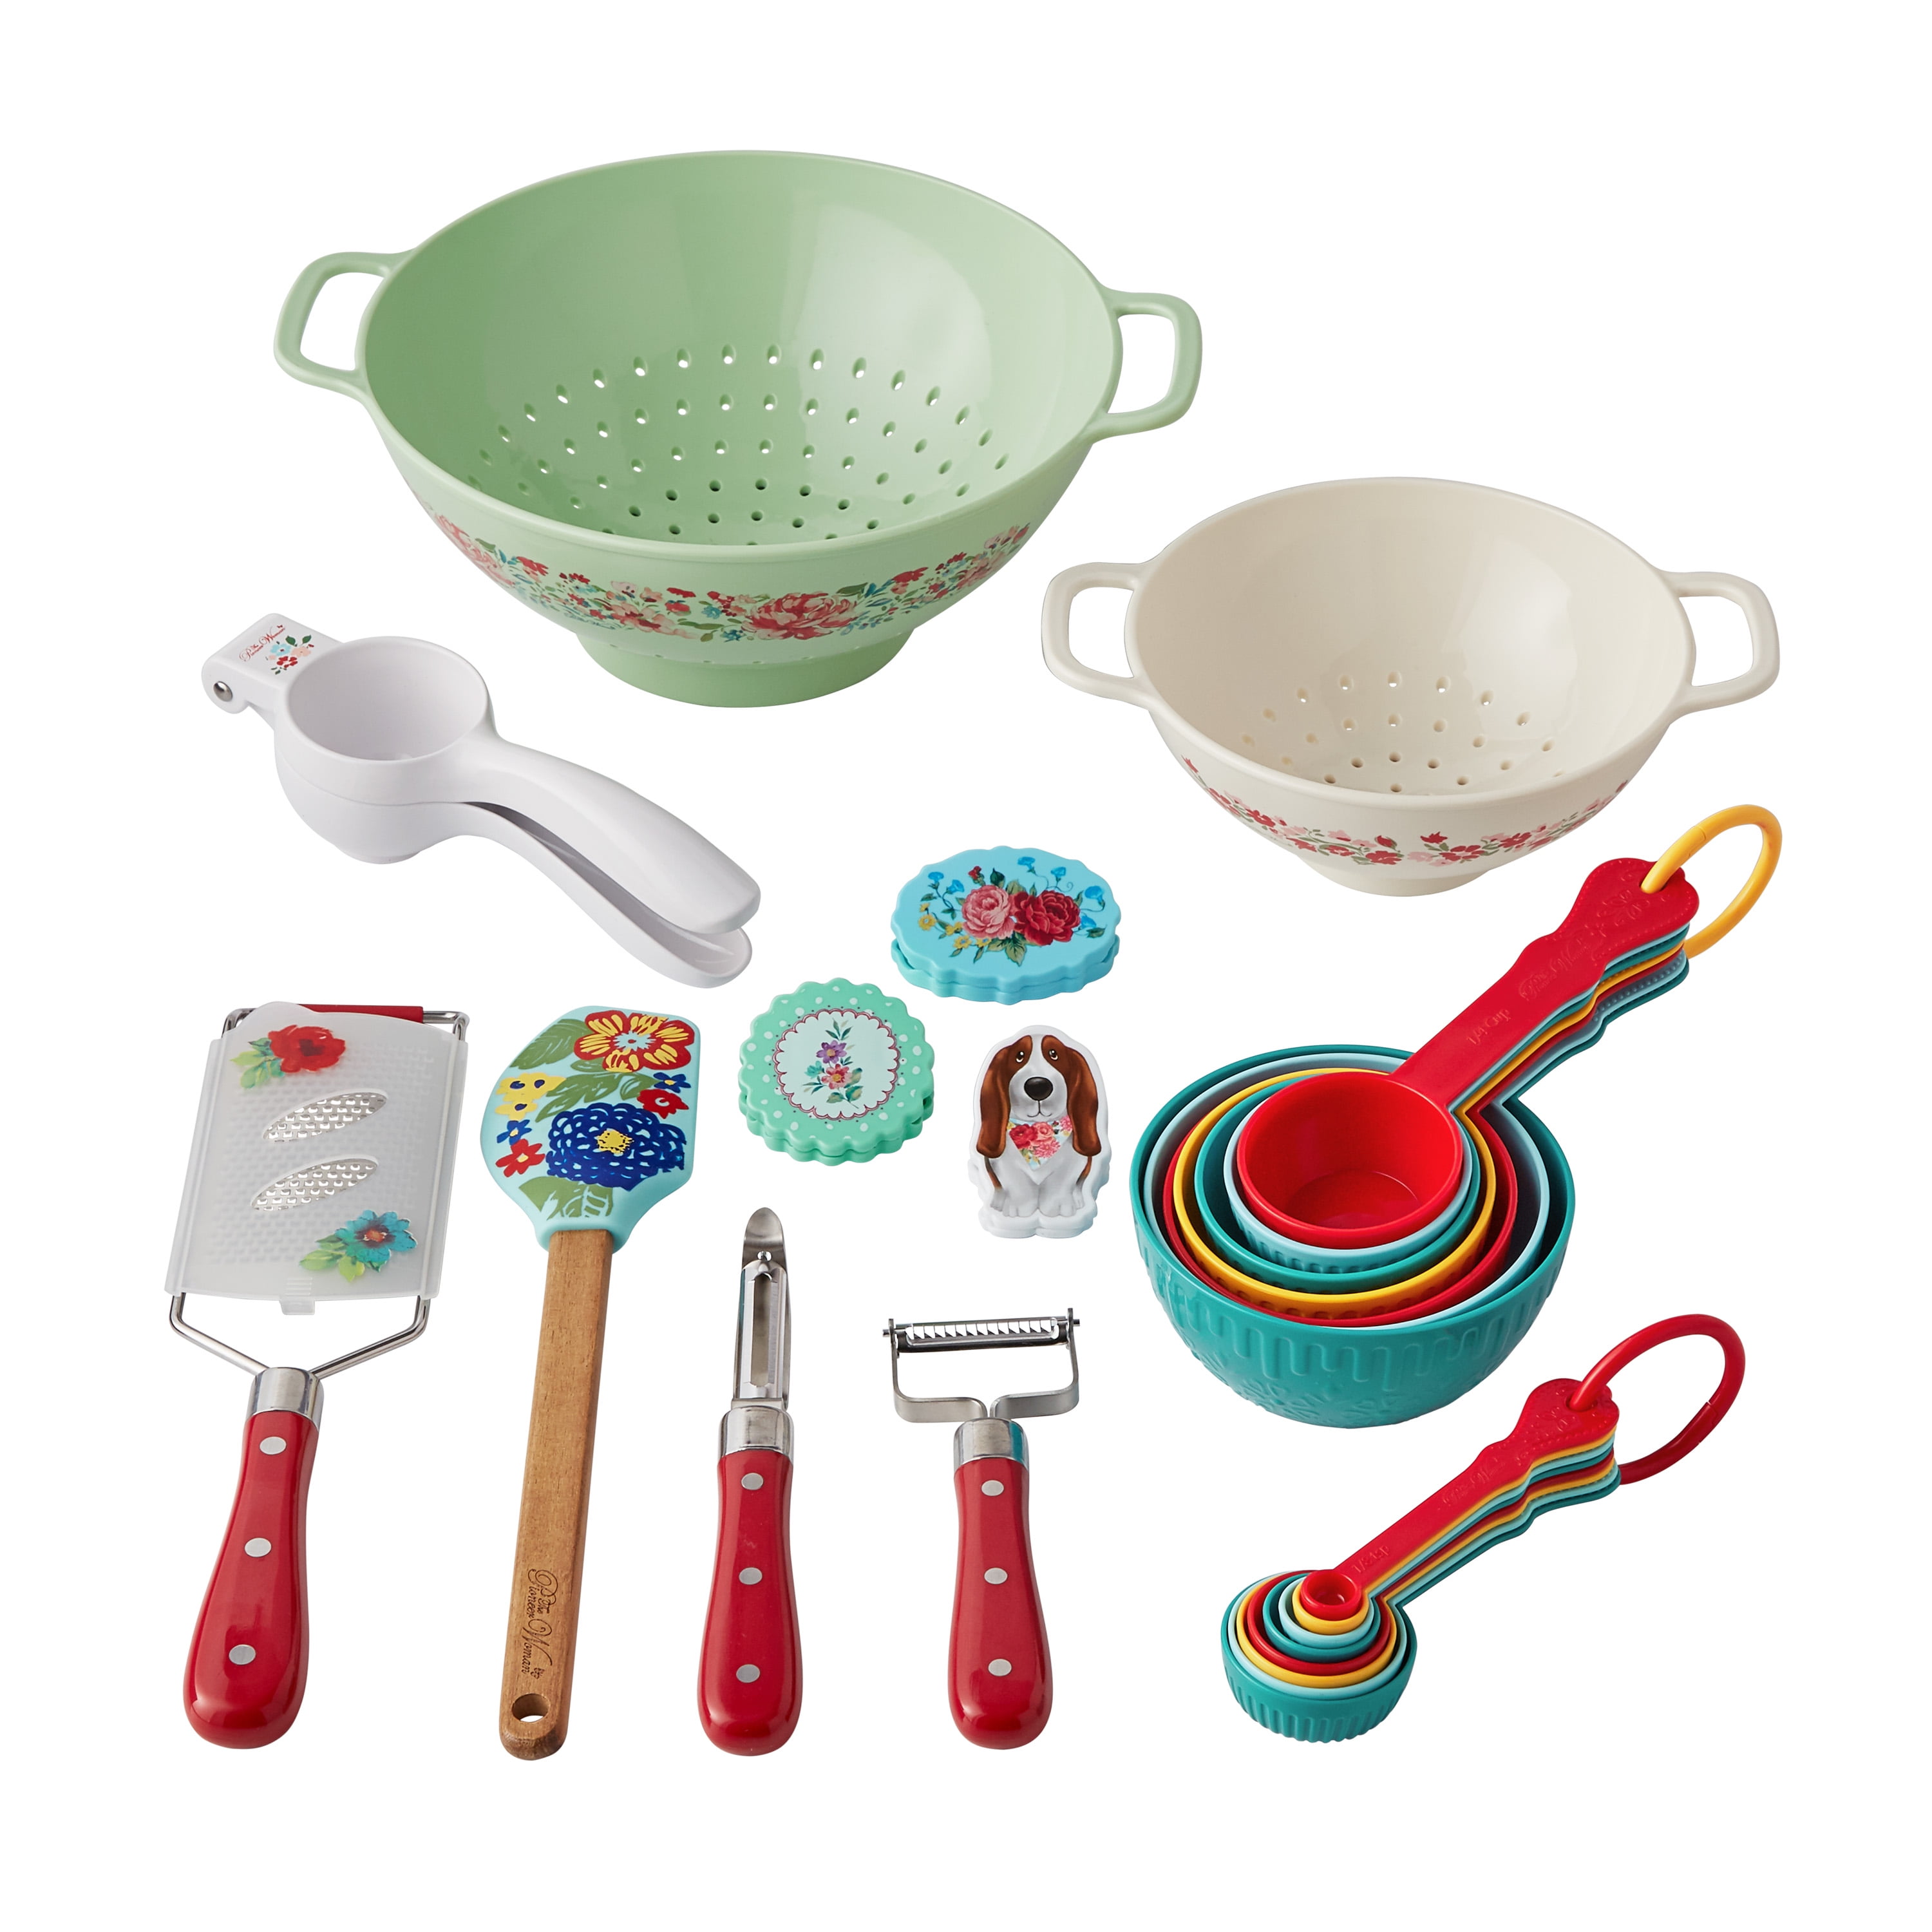 The Pioneer Woman 10-Piece Kitchen Gadget Set with Sifter, Spatulas,  Scoops, and Clips, Teal/Floral 